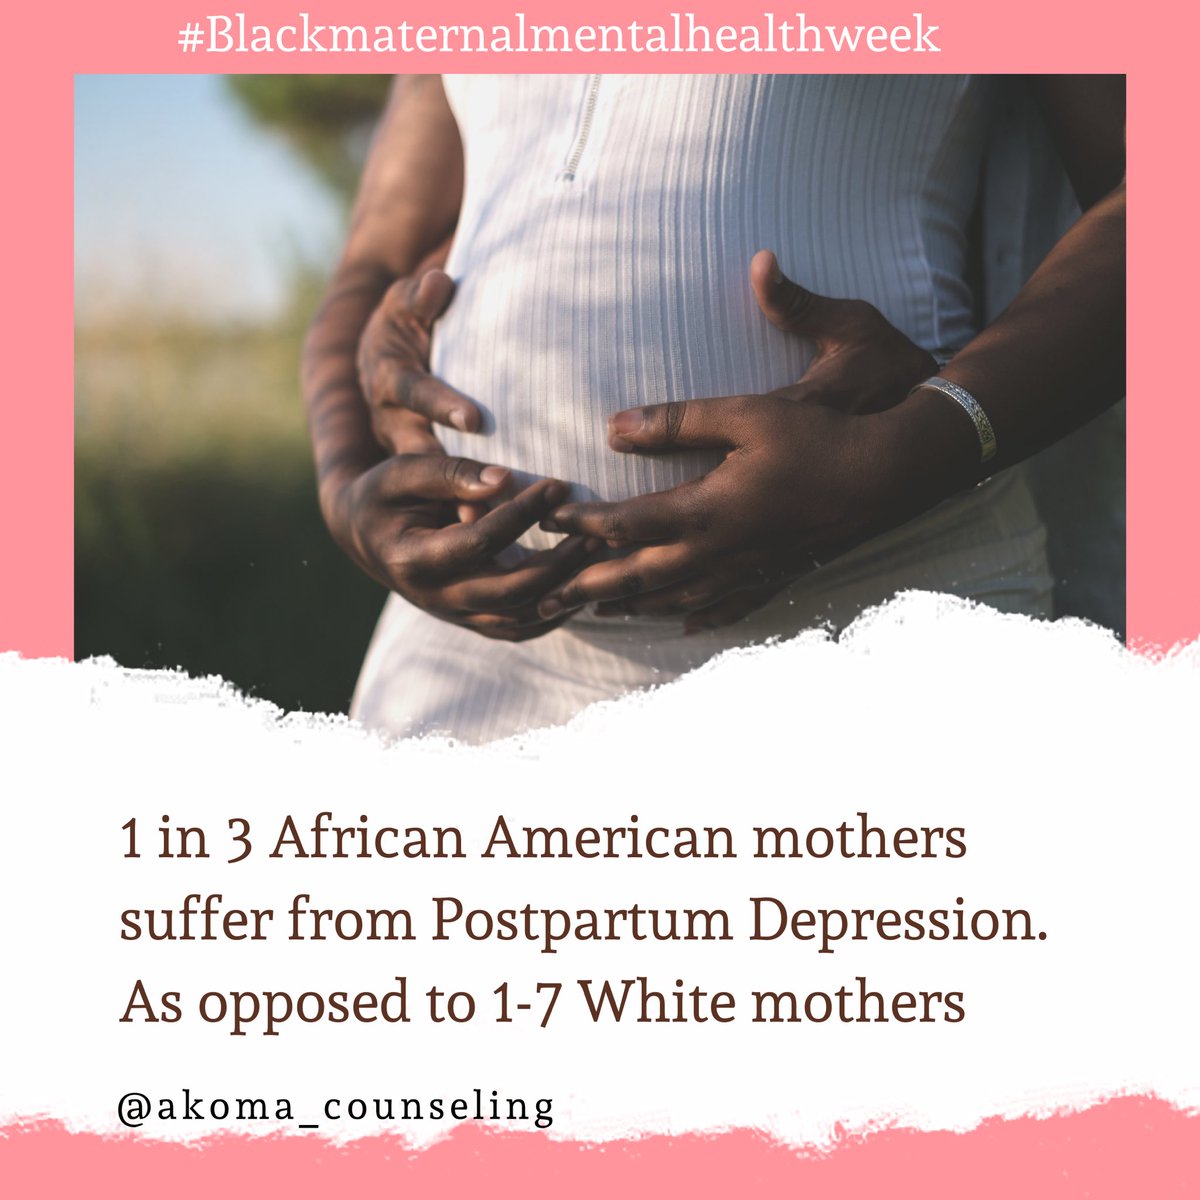 Did you know that not only are #Blackmaternalmortality rates high our #Blackmaternalmentalhealth rates are high too.  Your #mentalhealth can impact your pregnancy and delivery.  Consequences of untreated perinatal mood disorders are many #blackmaternalmentalhealthweek